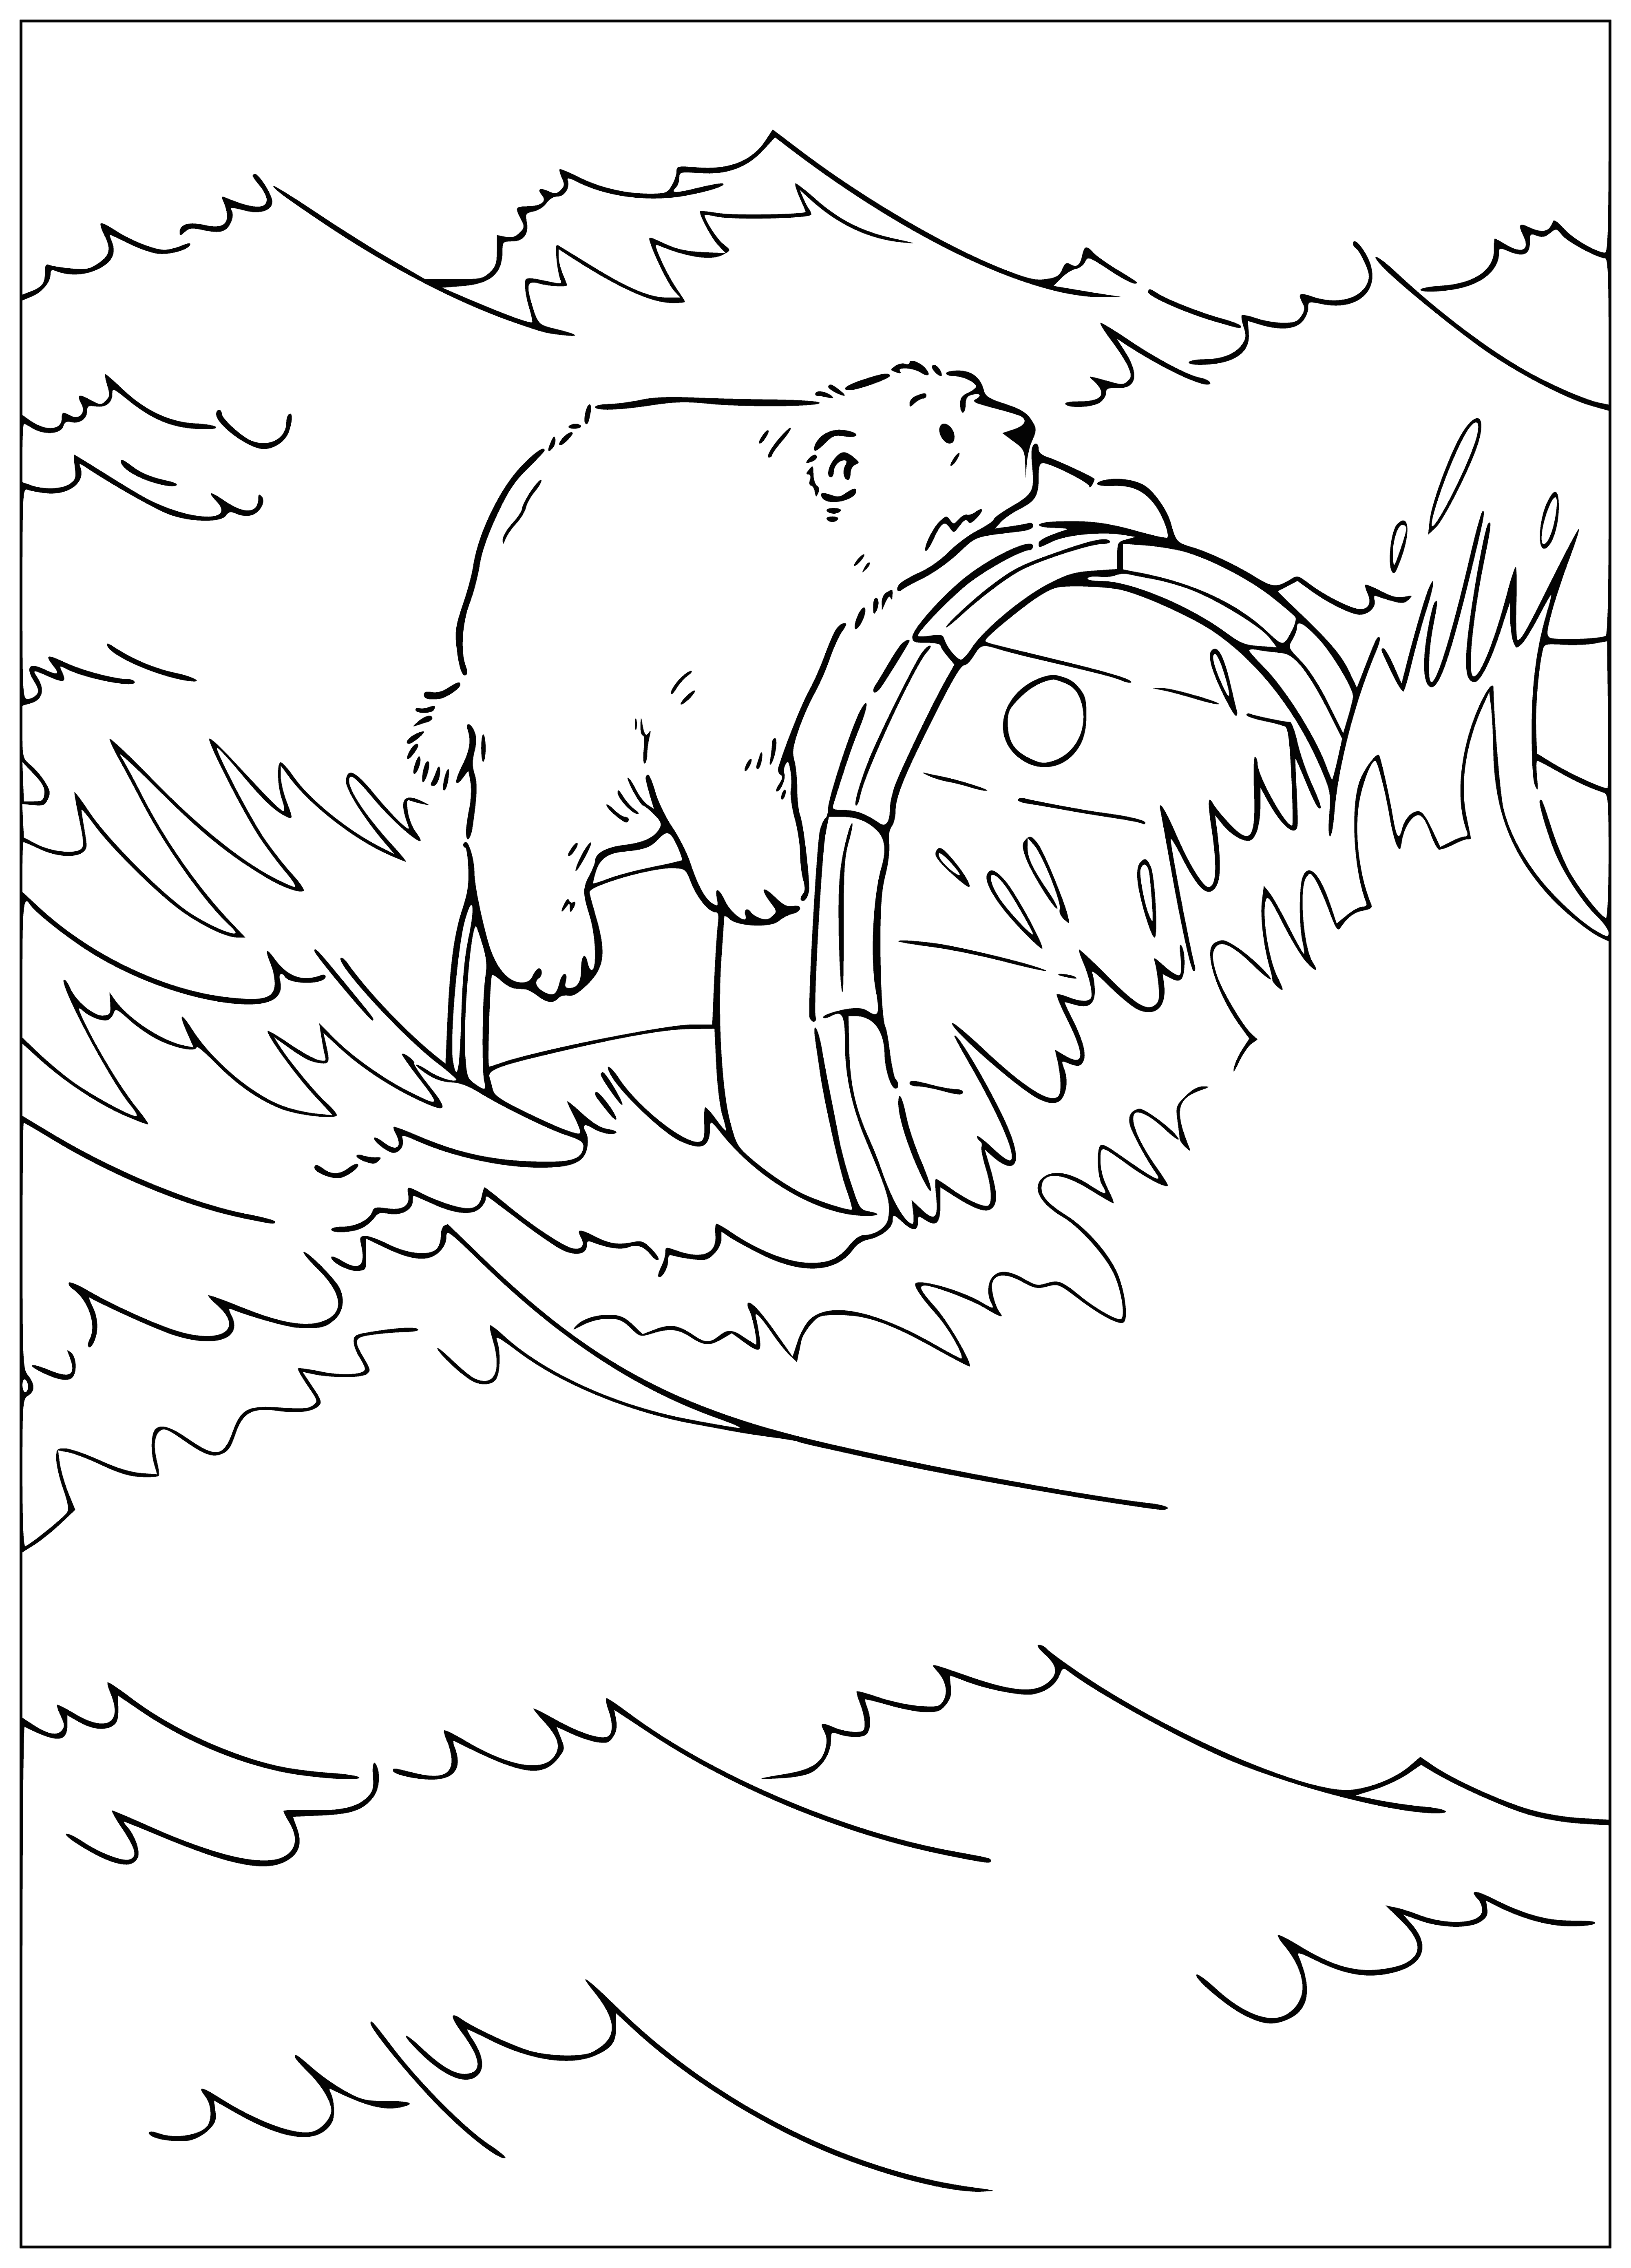 coloring page: Little polar bear stands on floe amid snowy storm; looks up as fur blows in wind. #coloringpage #animals #snow